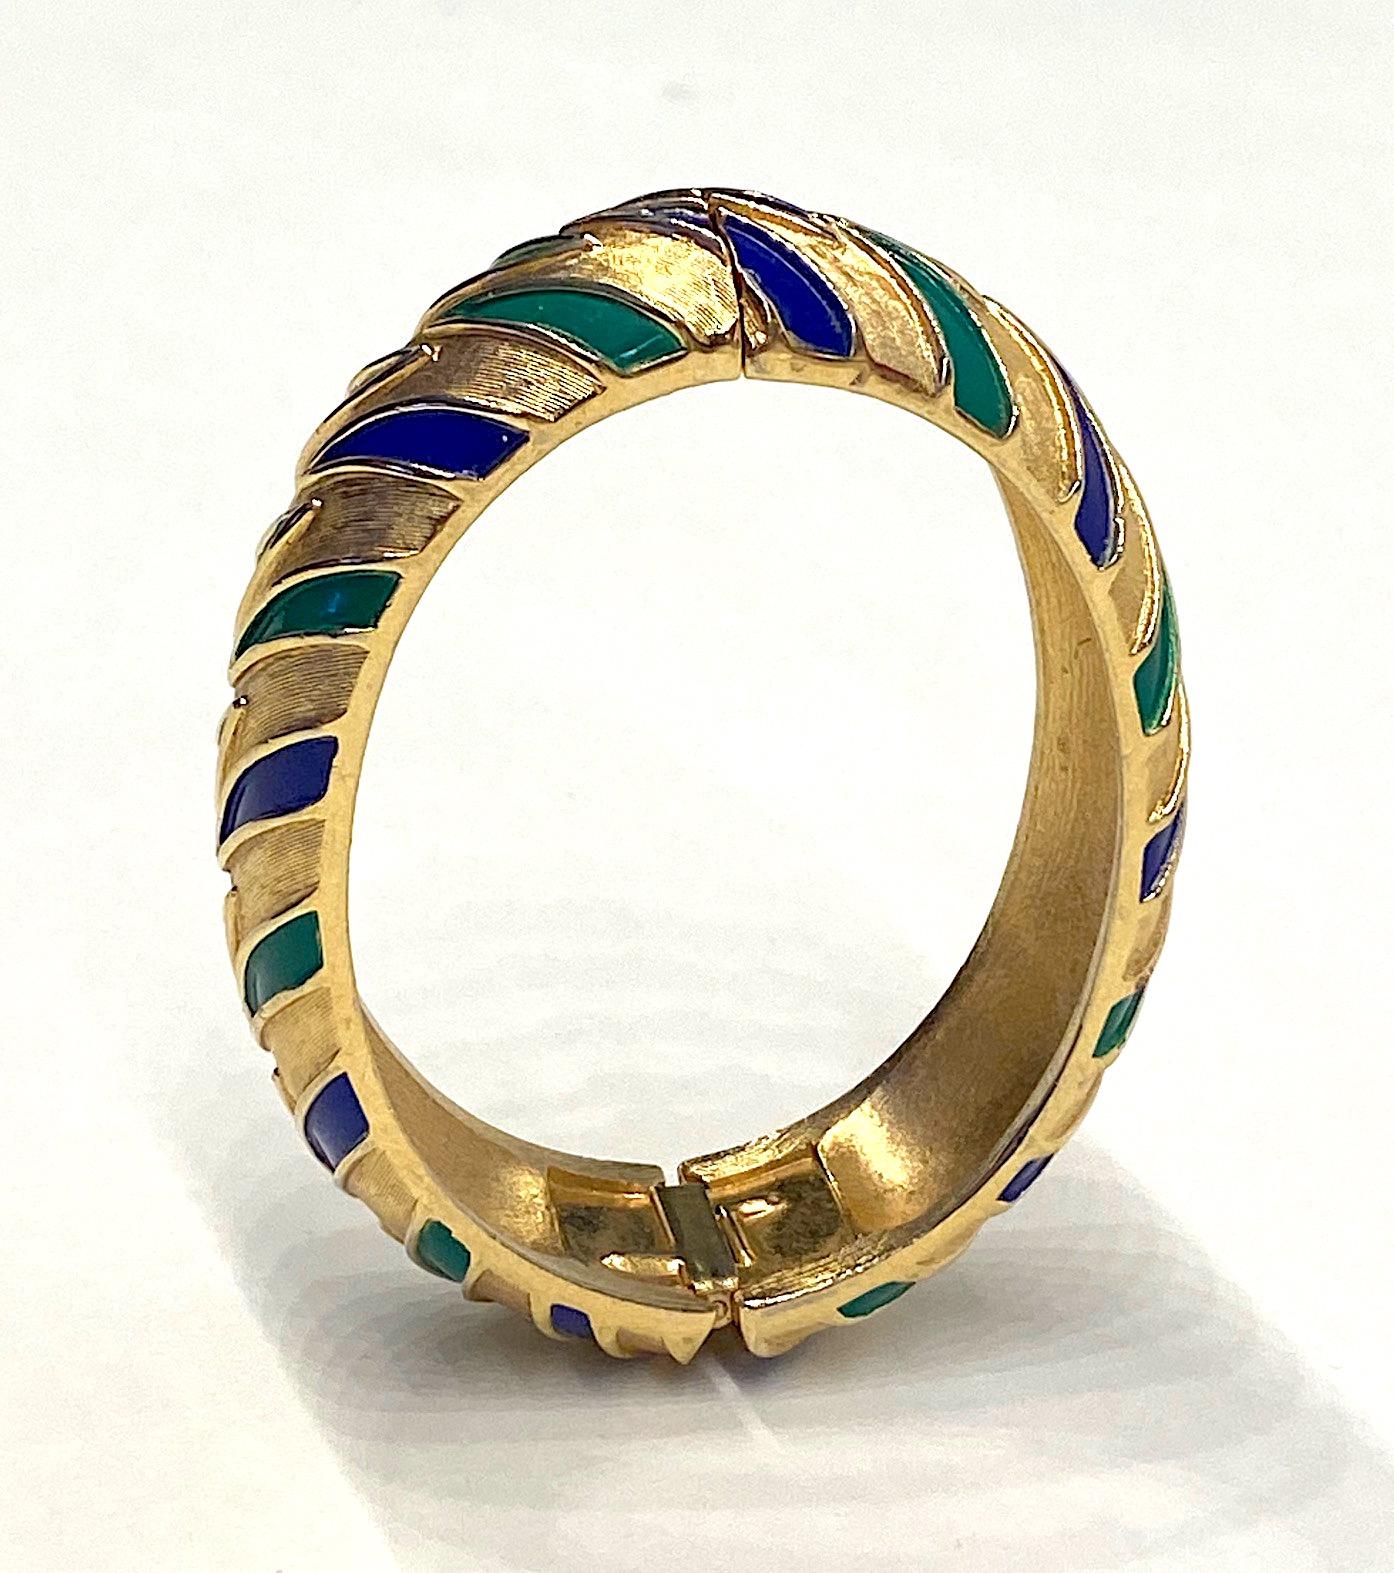 A lovely 1960s Trifari satin gold bangle with navy blue and green enamel stripe accents. The bangle is an oval shape with a light dome or curve measuring .25 of an inch thick. It has a hinge on one side and a safety clasp on the opposite side. The